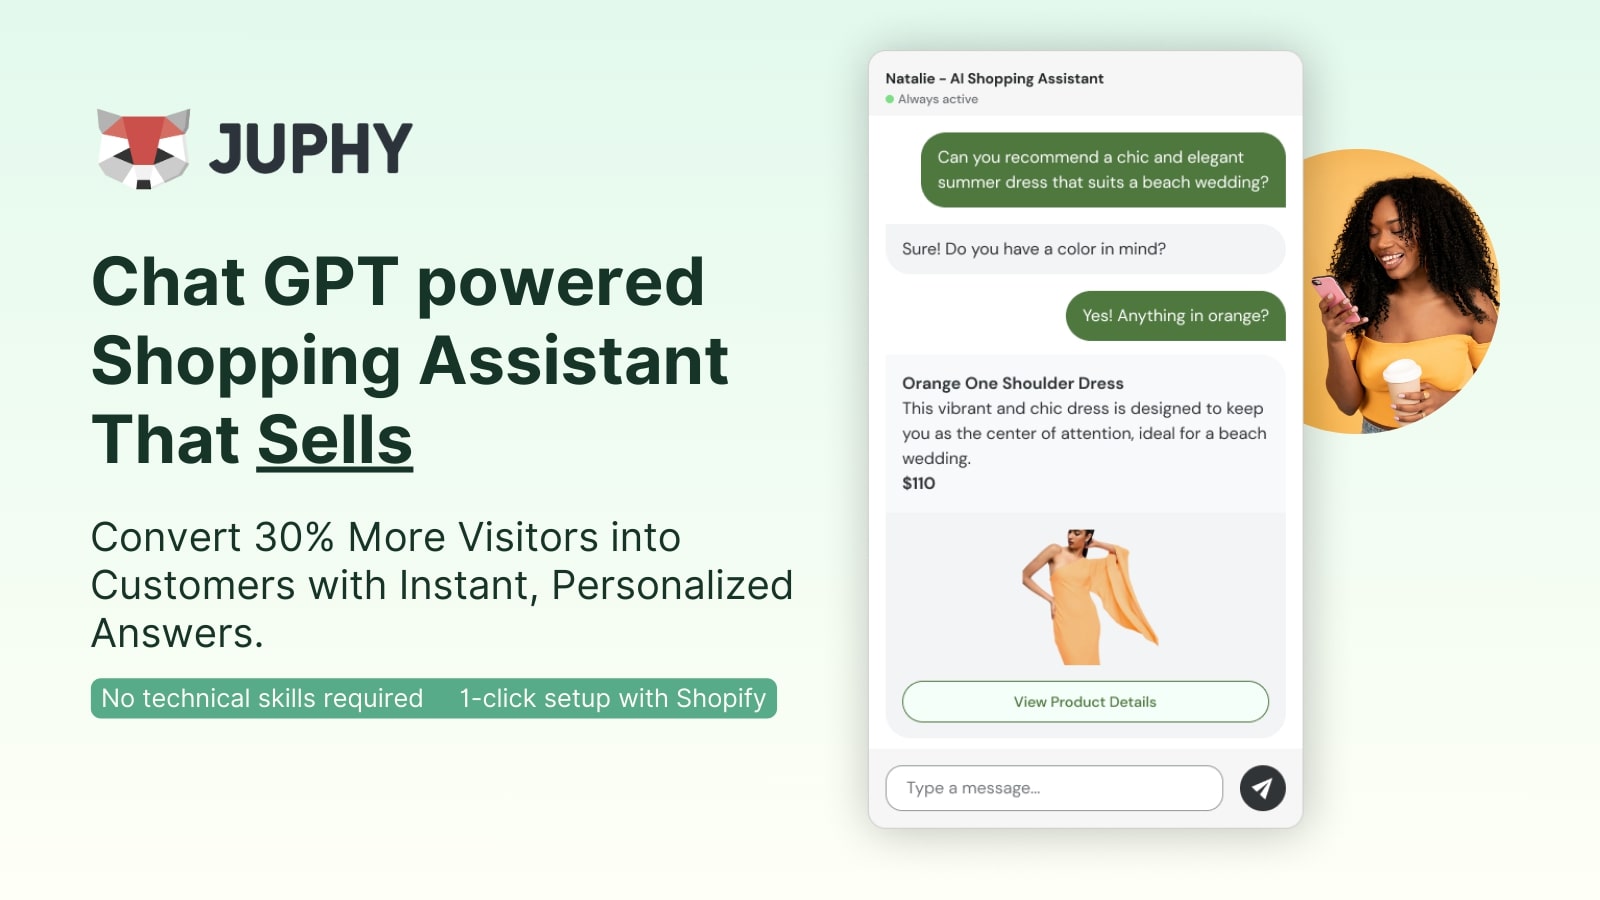 Let's check out Juphy AI's features and discover how it can transform your Shopify store into a popular shopping destination.